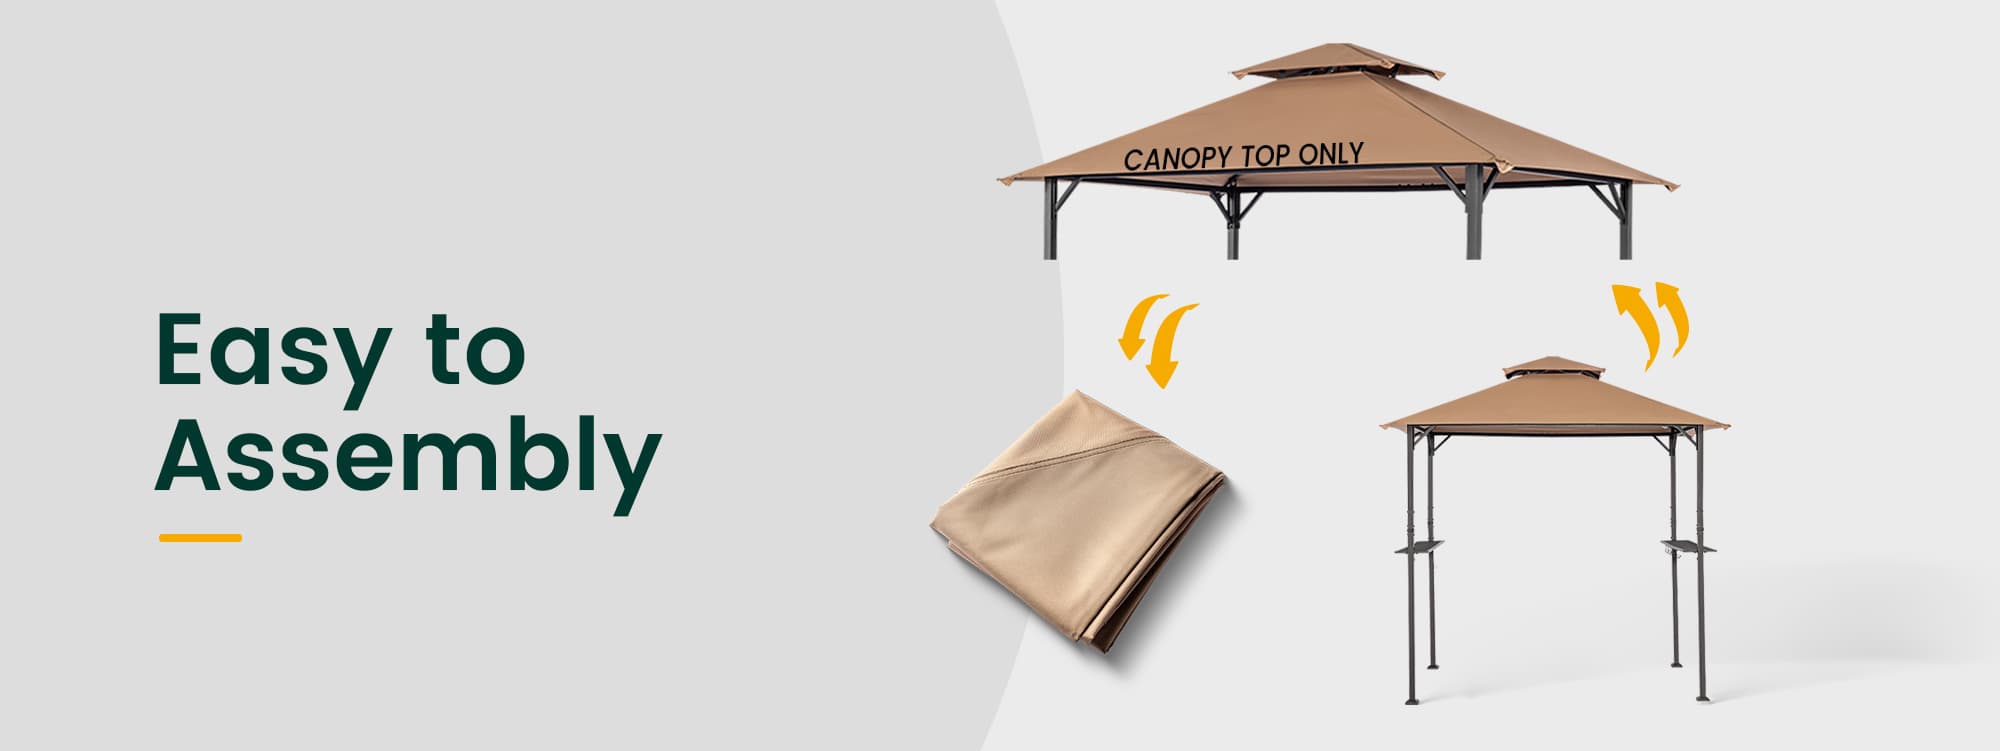 durable canopy for grill gazebo